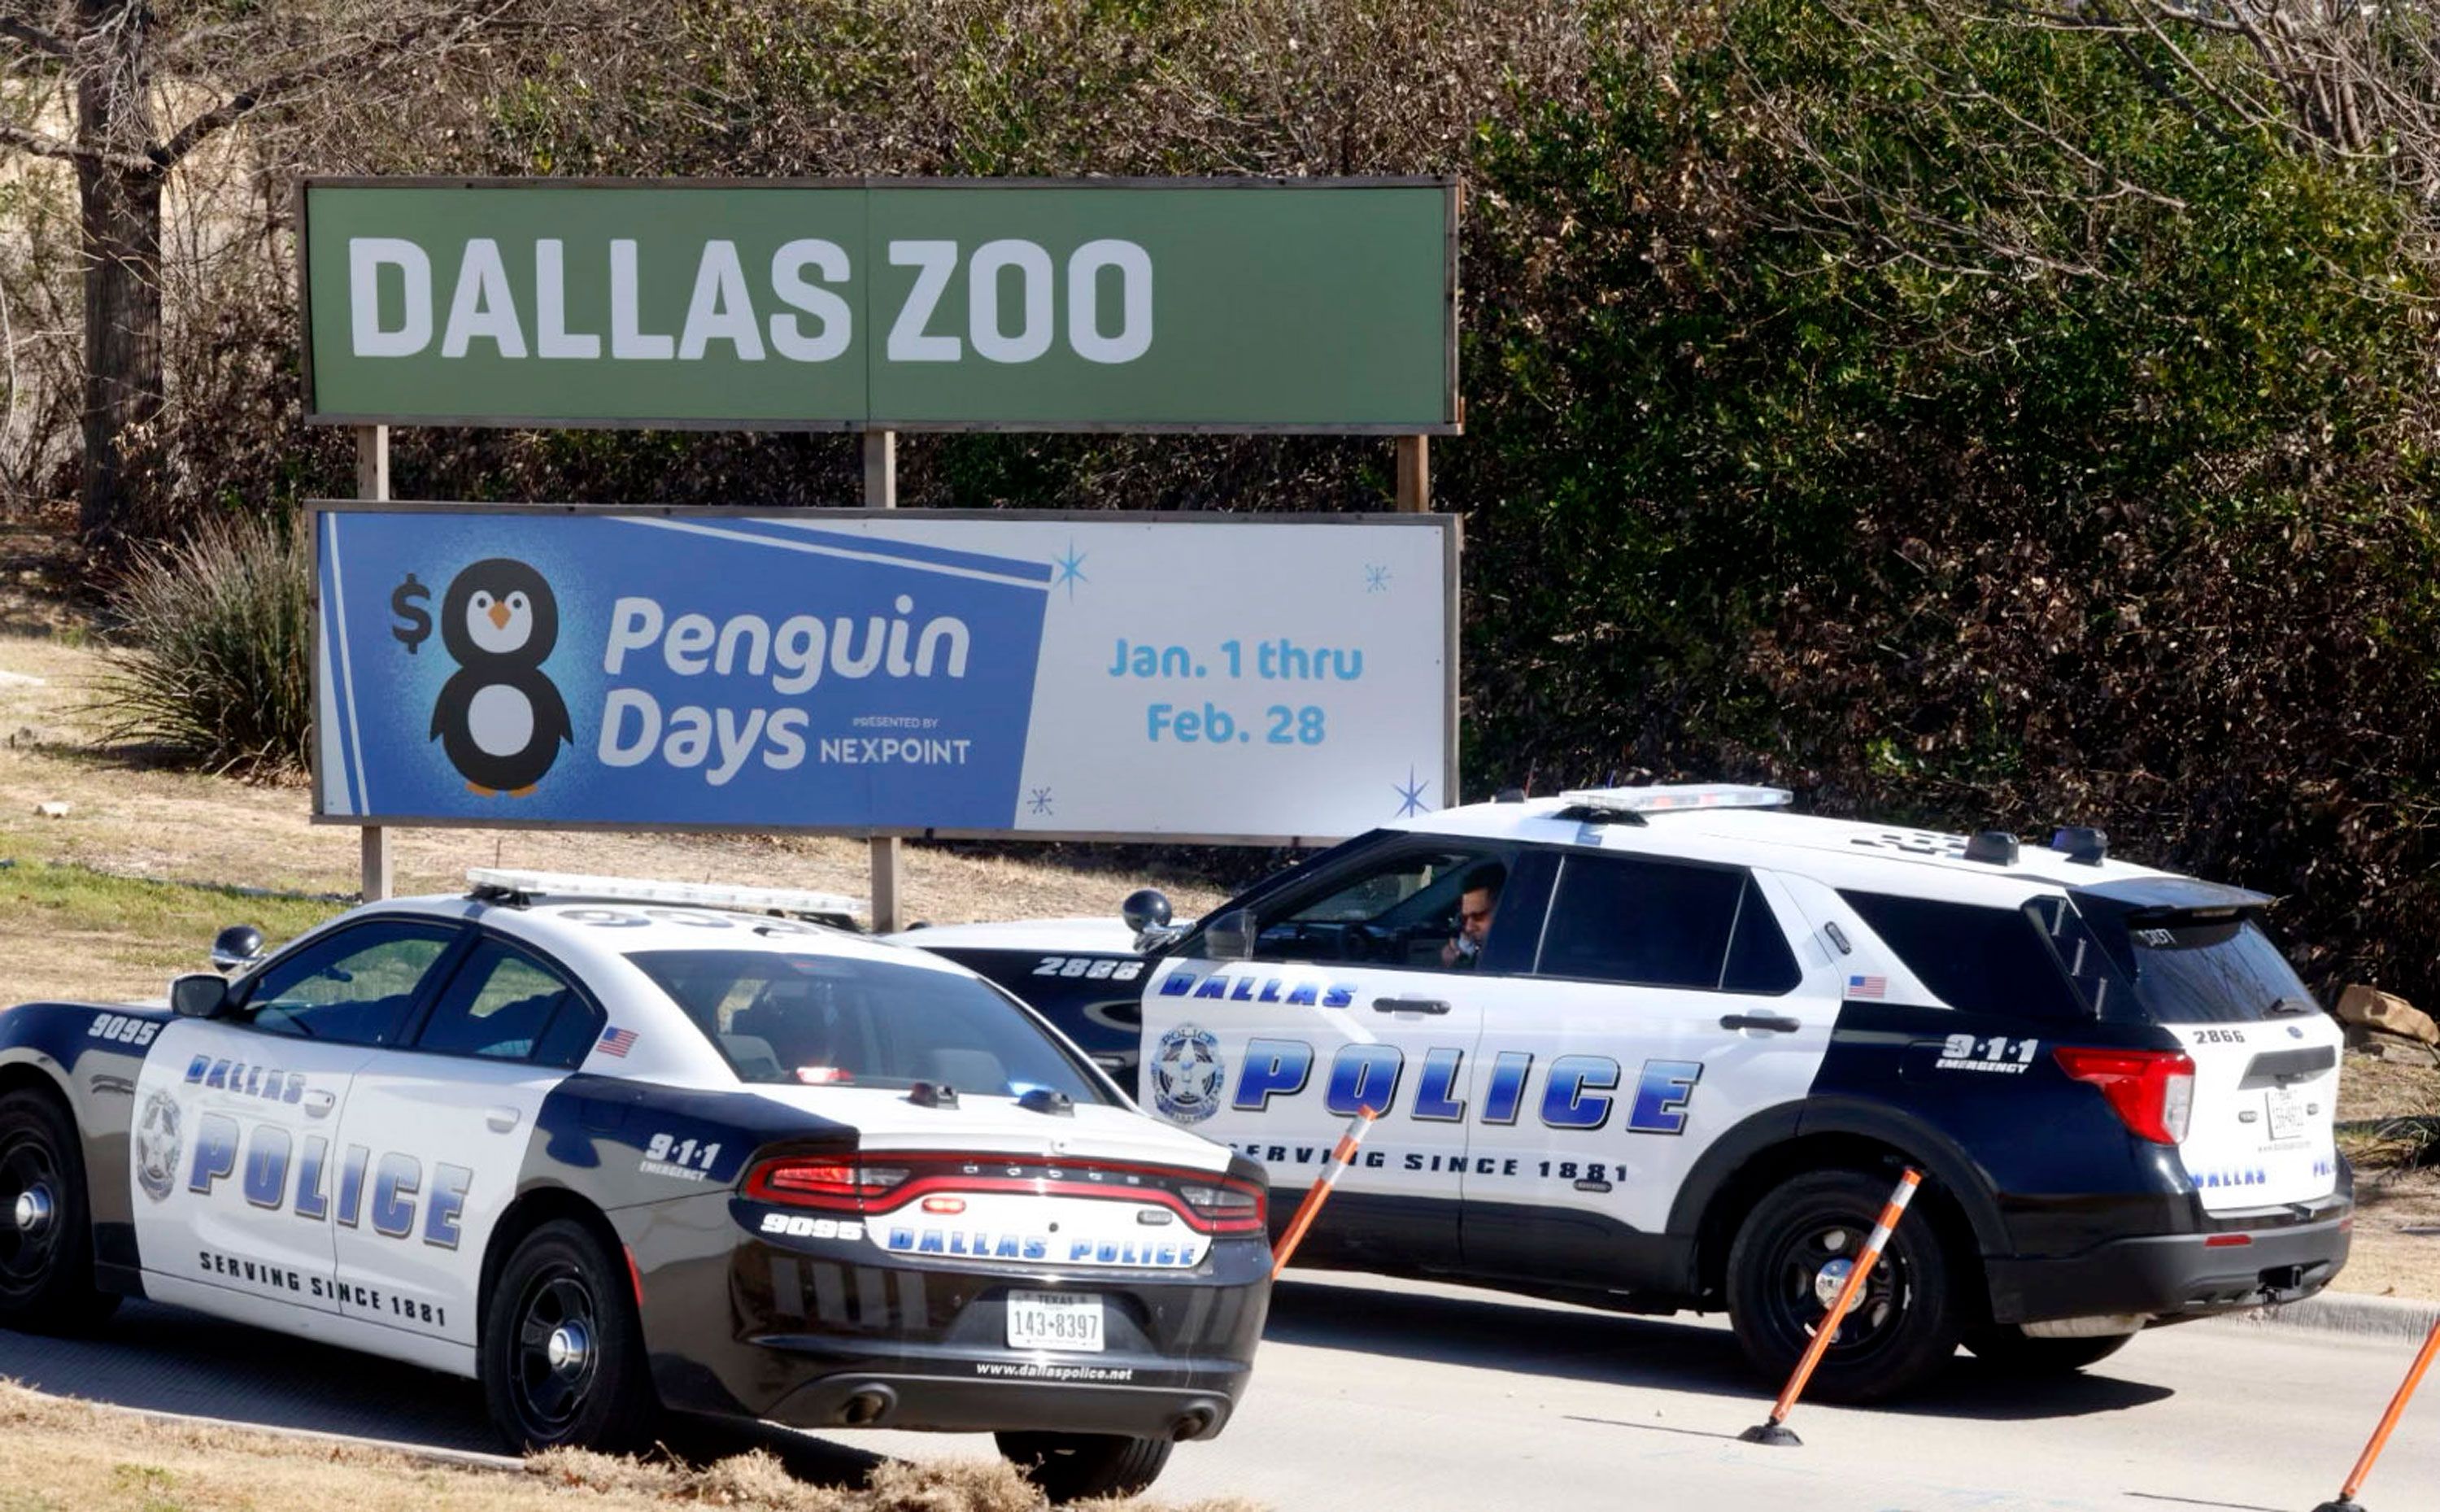 What Is Going On at the Dallas Zoo With Its Stolen Animals?